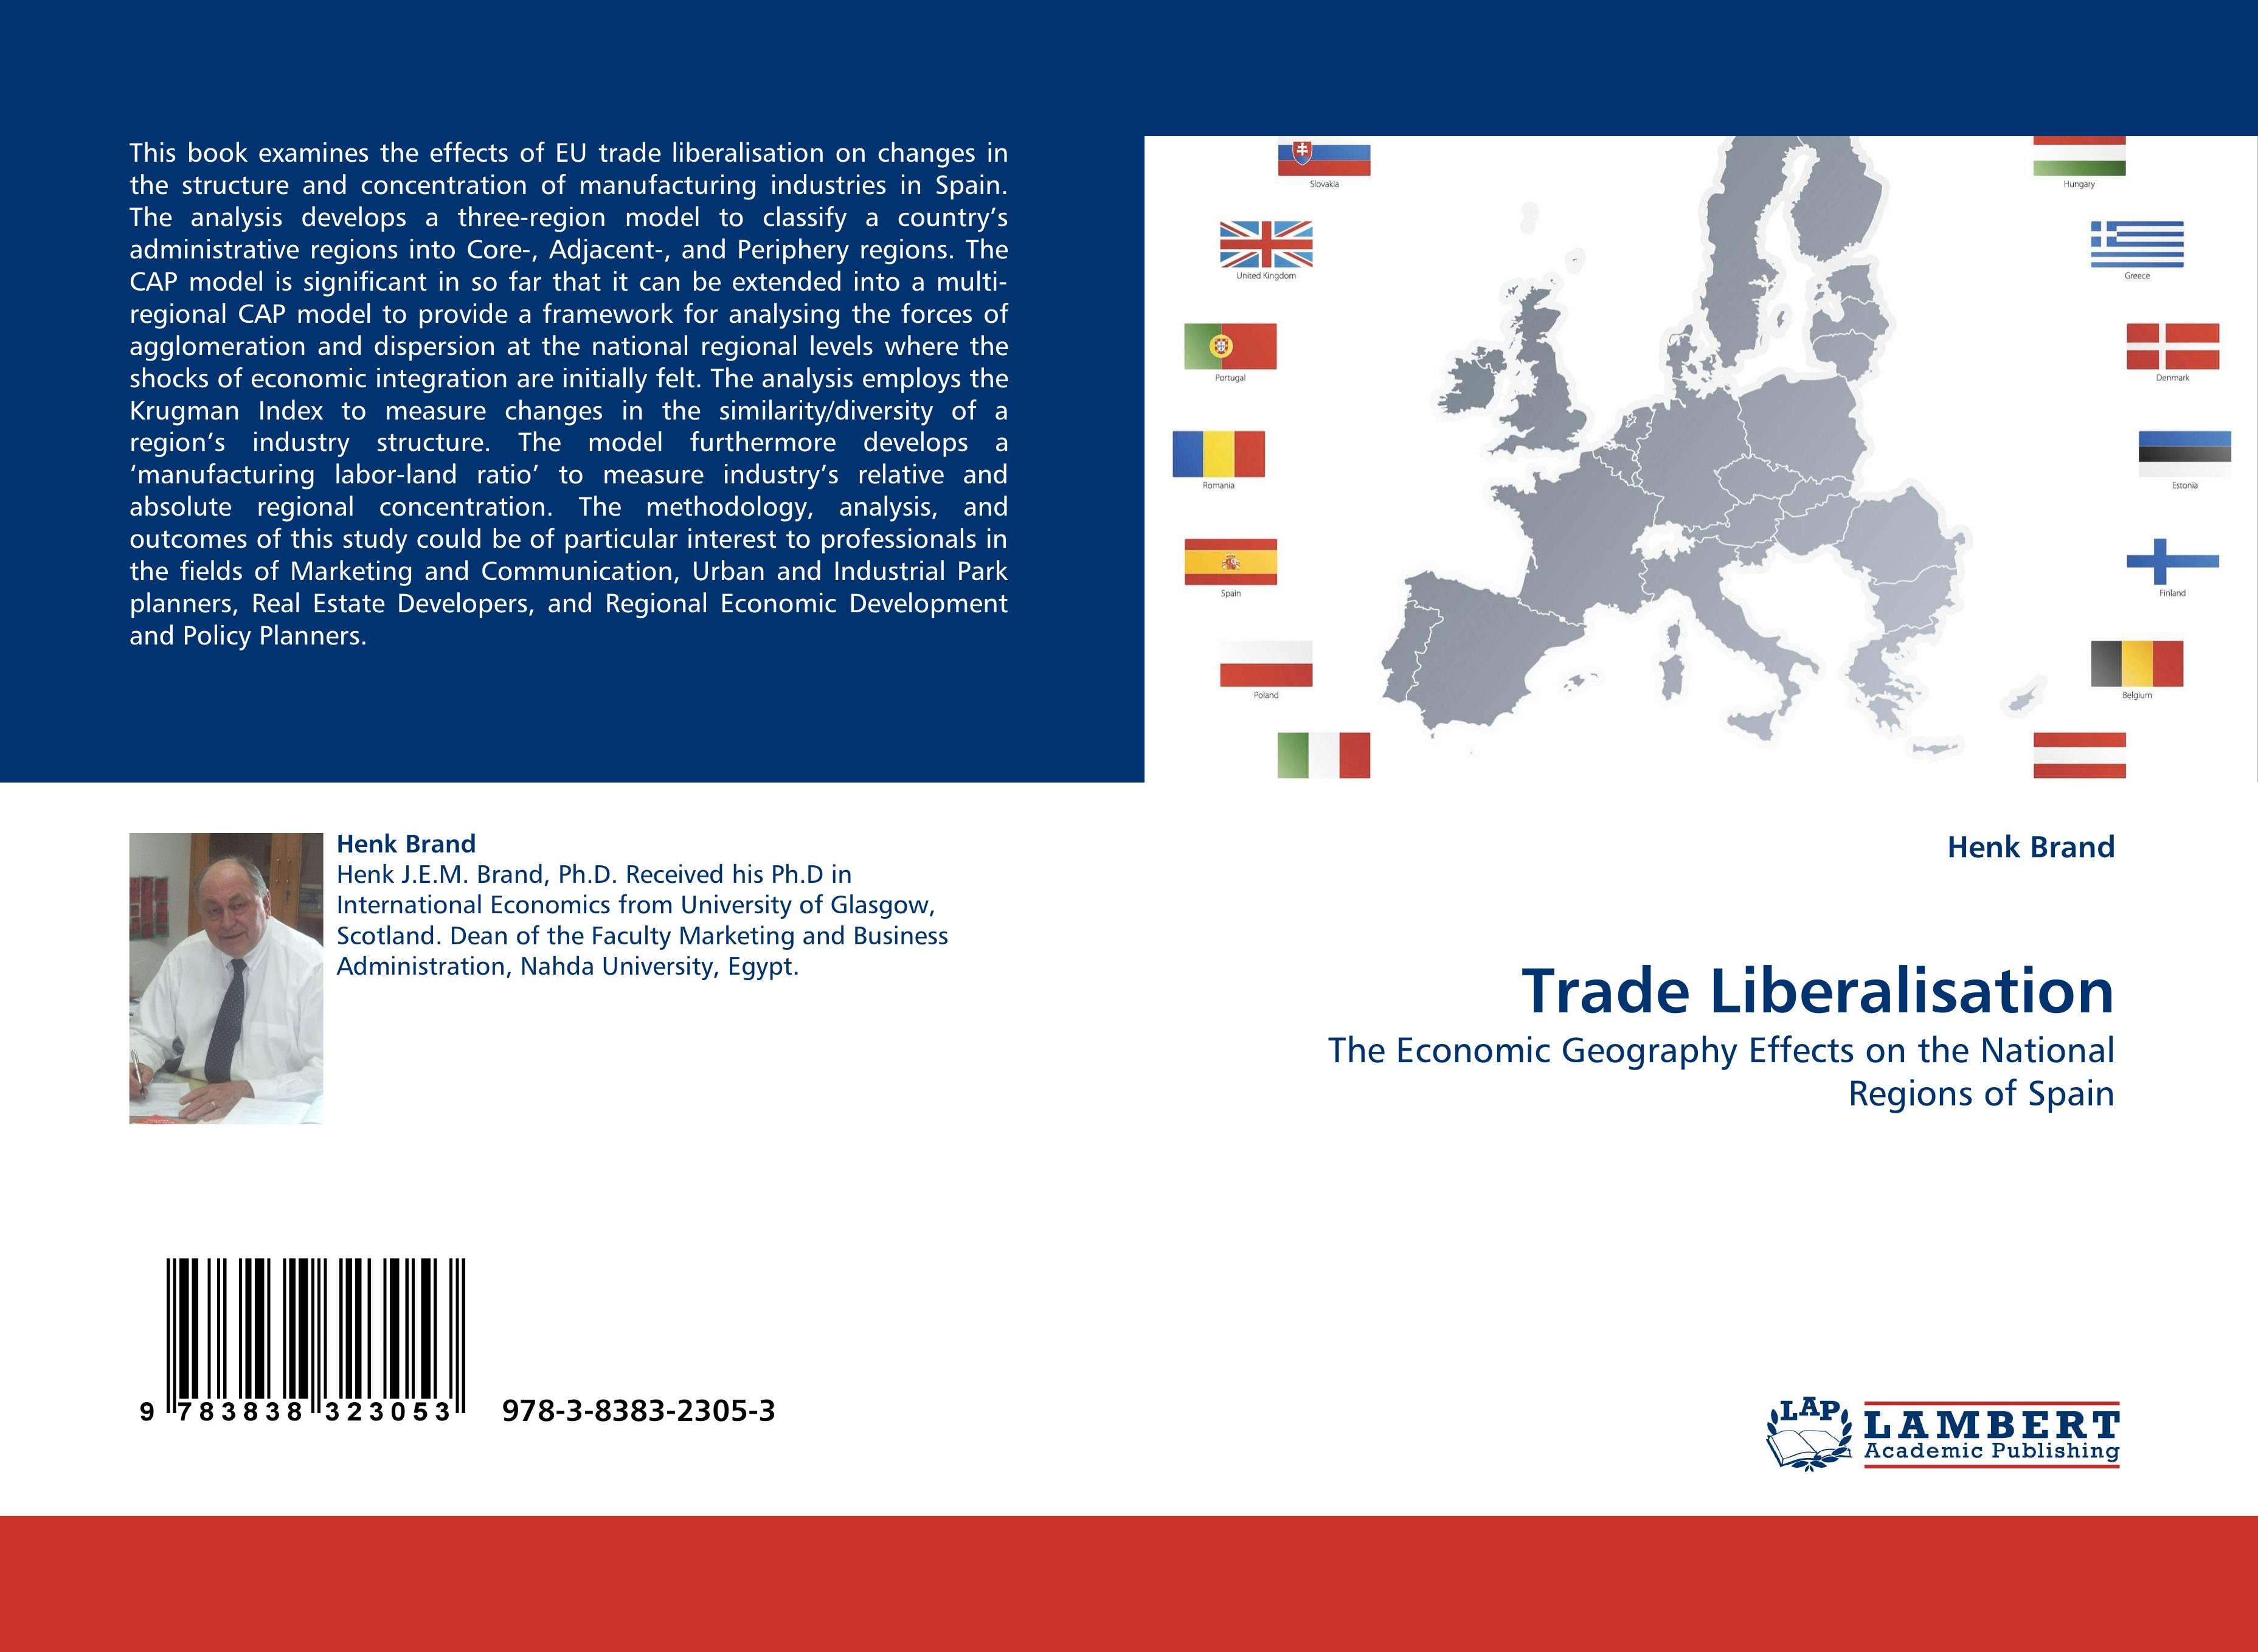 Trade Liberalisation | The Economic Geography Effects on the National Regions of Spain | Henk Brand | Taschenbuch | Paperback | 72 S. | Englisch | 2010 | LAP LAMBERT Academic Publishing - Brand, Henk